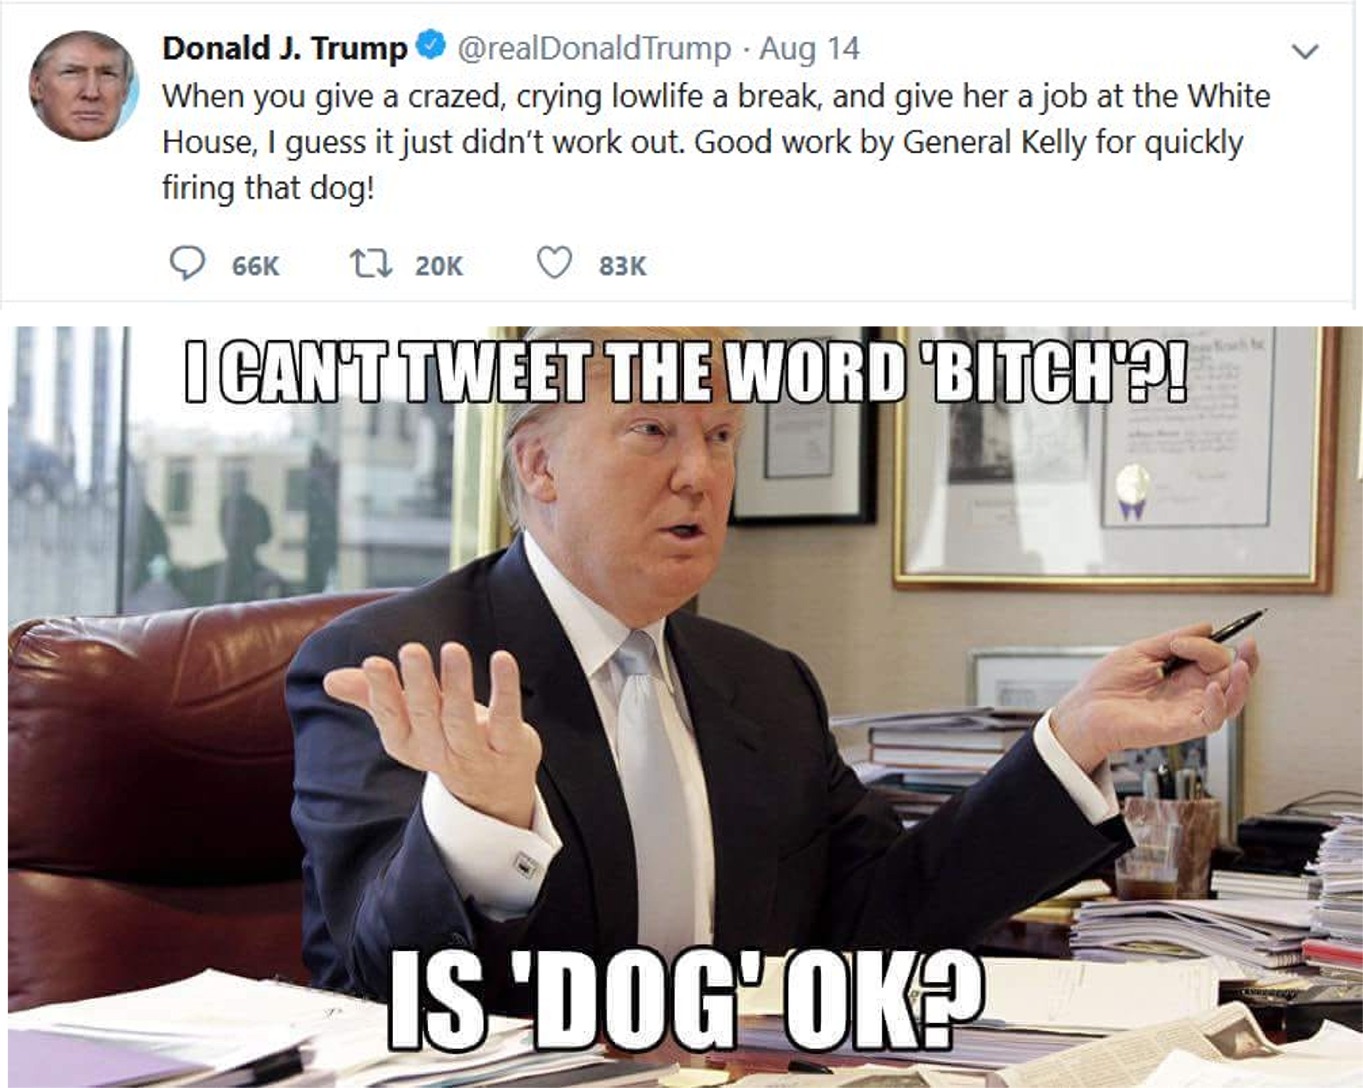 memes - Donald Trump - Donald J. Trump Trump Aug 14 When you give a crazed, crying lowlife a break, and give her a job at the White House, I guess it just didn't work out. Good work by General Kelly for quickly firing that dog! 66K 83K Icanttweet The Word